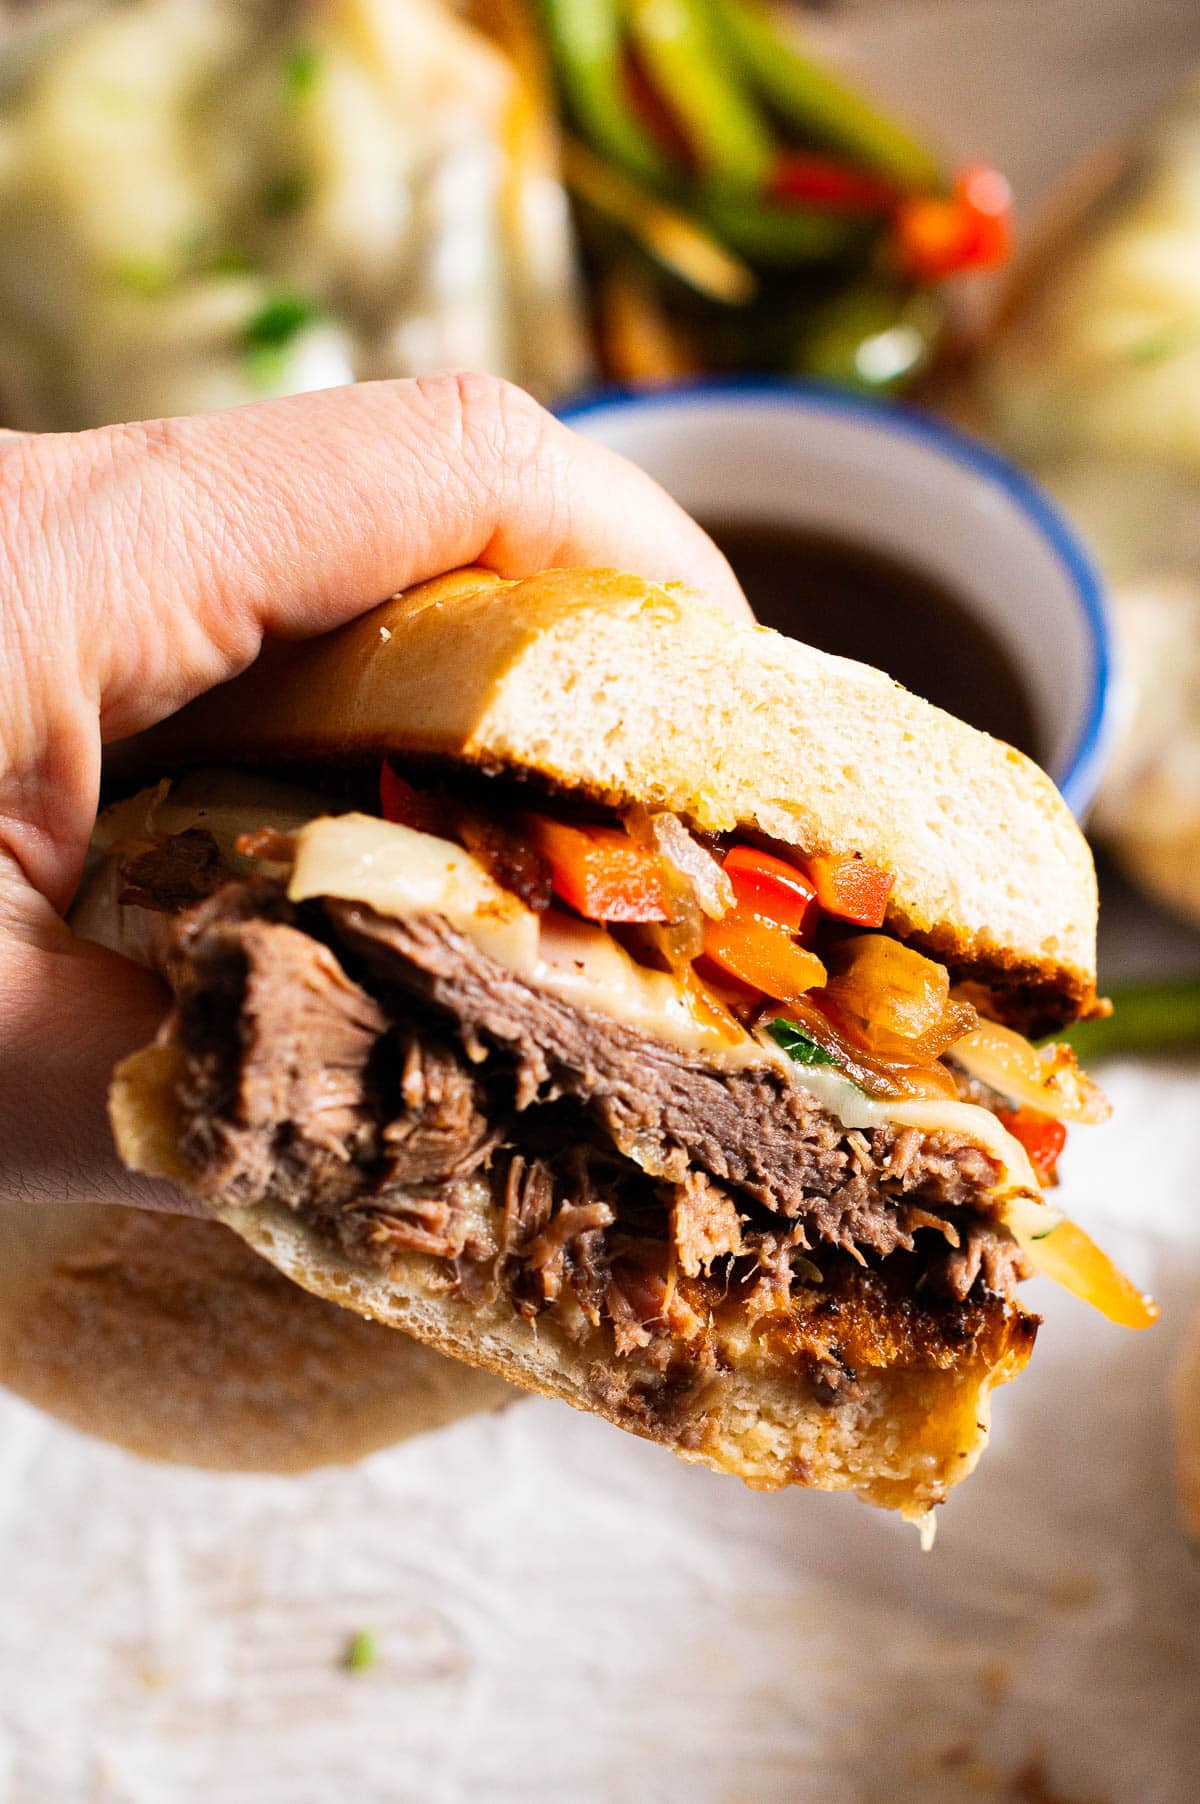 Person holding sliced instant pot French dip sandwich showing texture inside.